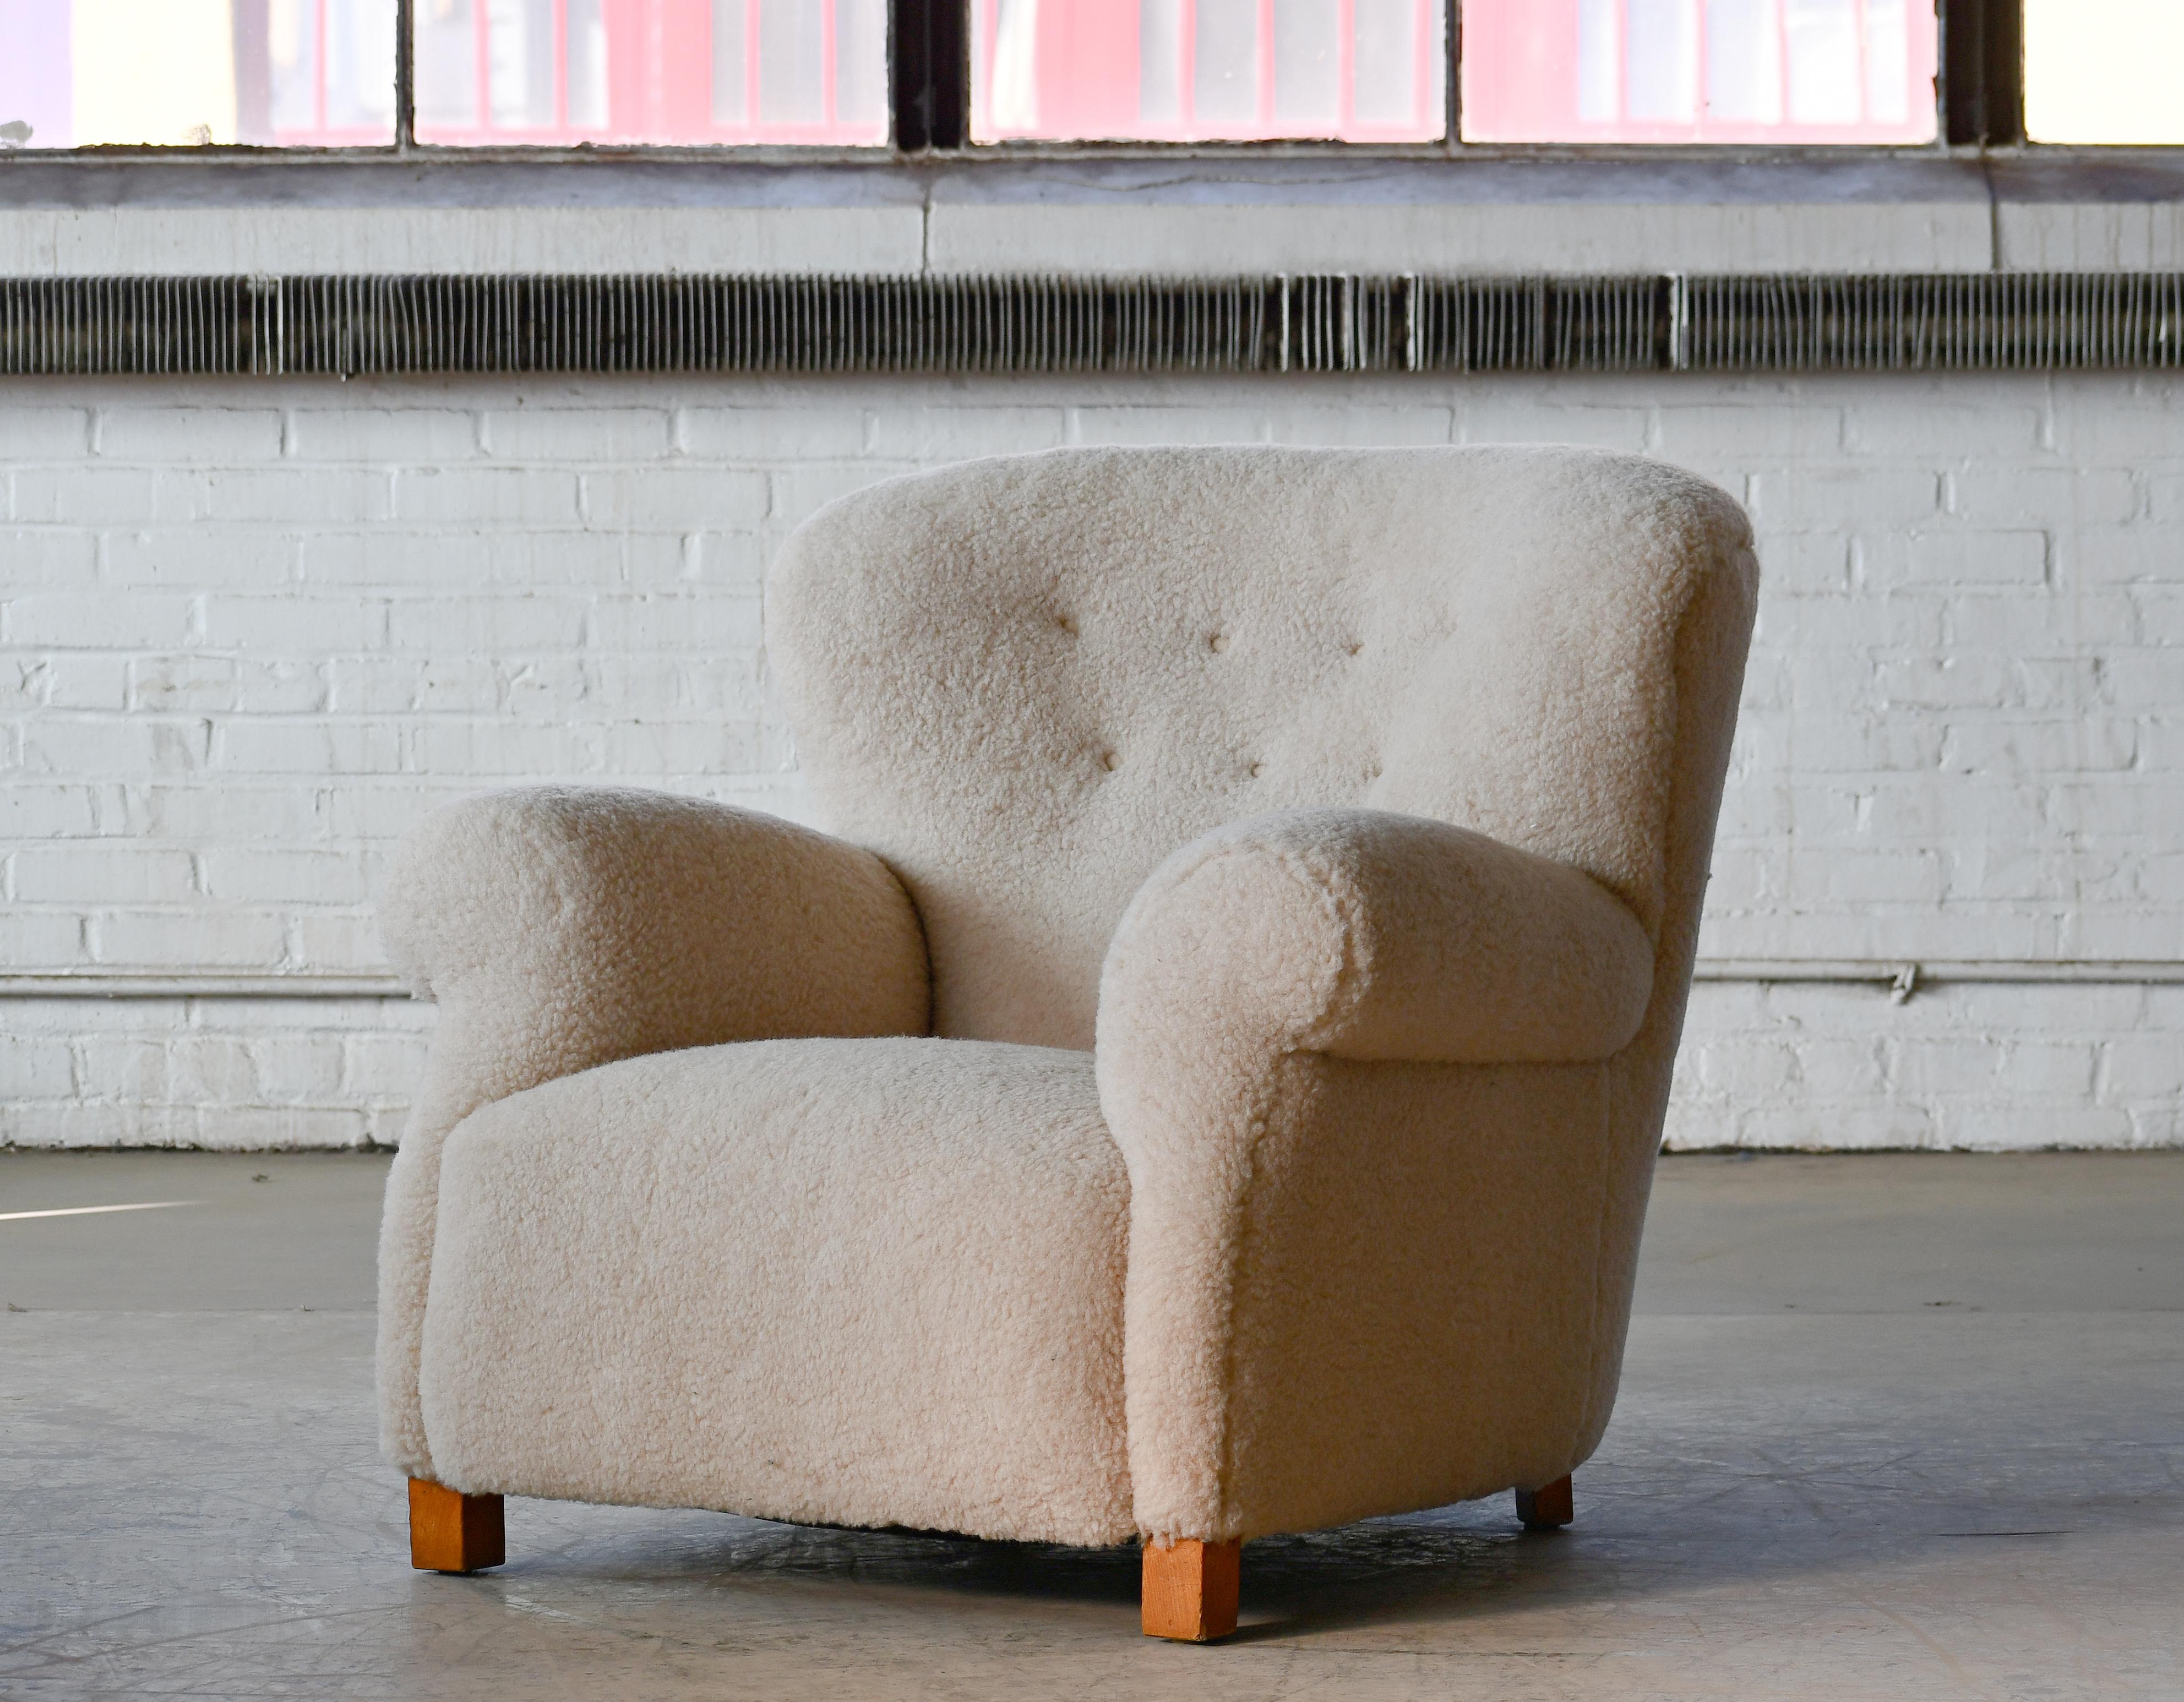 Sublime large scale model 1518 lounge club chair made by Fritz Hansen in the late 1930s or early 1940s. The dramatic proportions are low and wide. Smooth tufted backrest. Superbly comfortable the chair has a very strong presence to anchor any room.